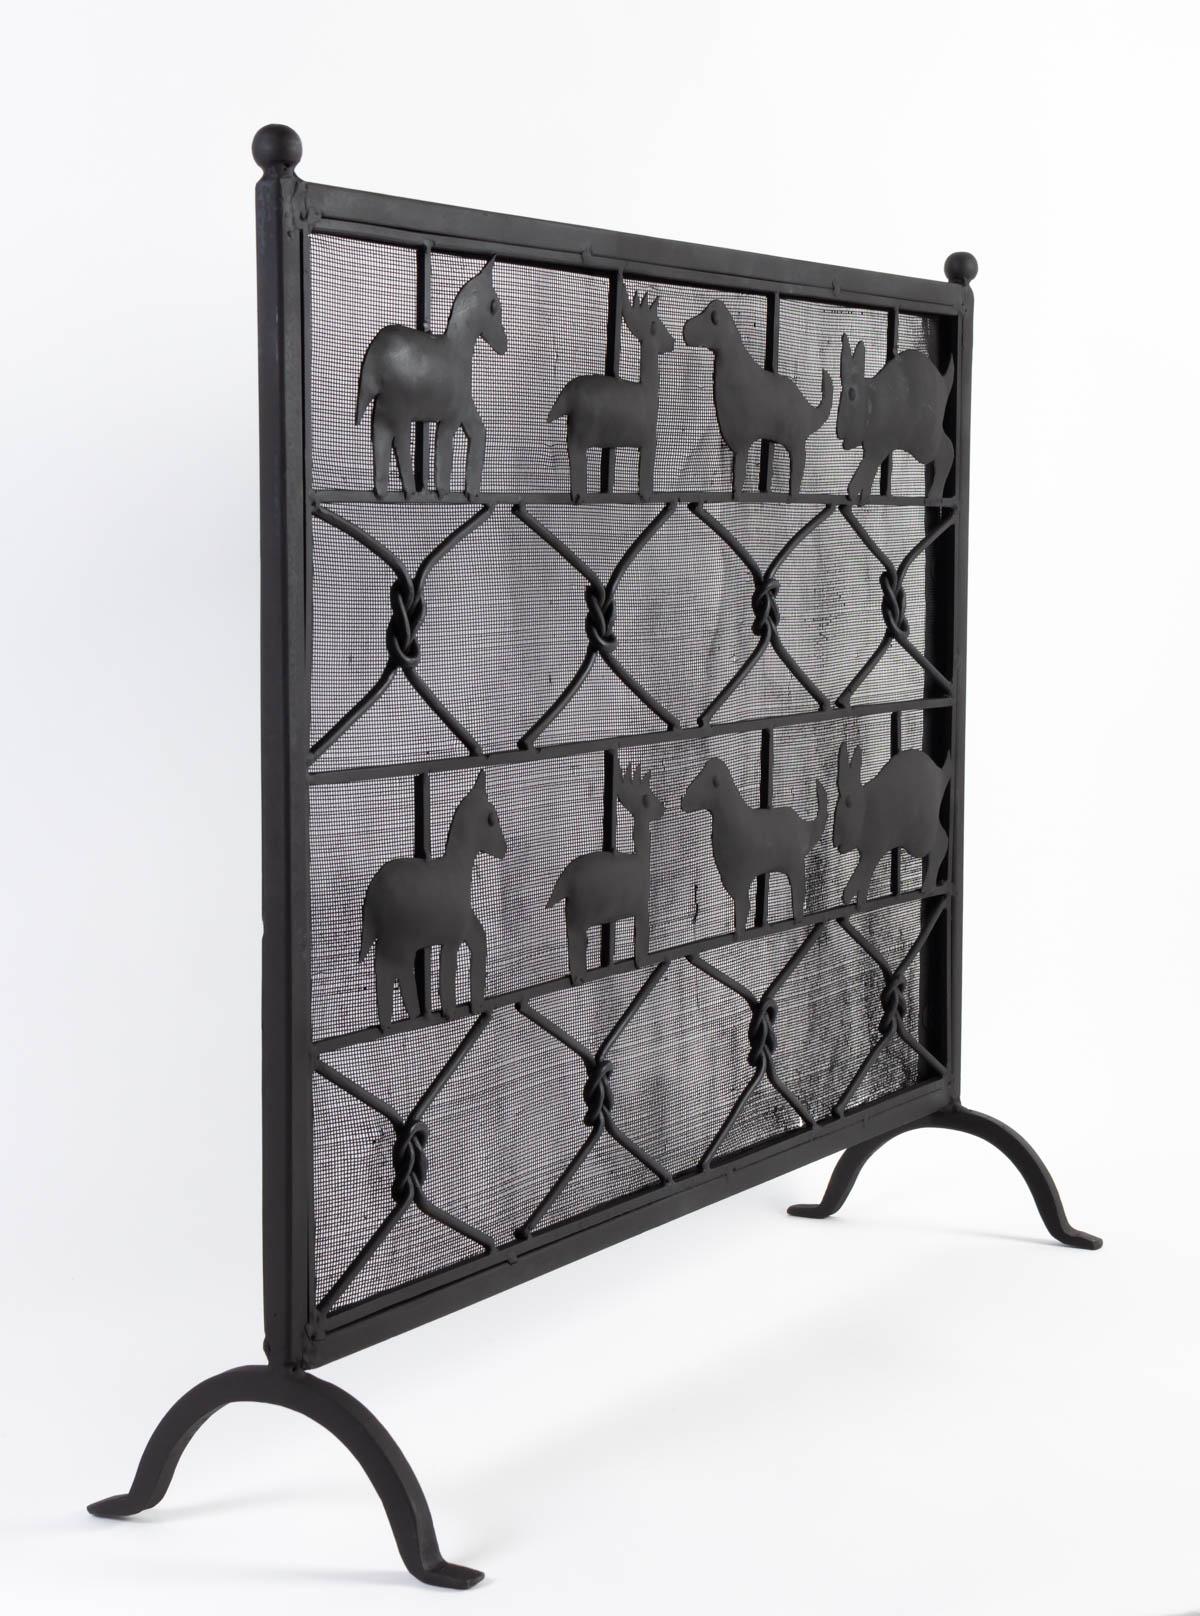 French 1950 Ateliers Marolles Fire Screen in Wrought Iron